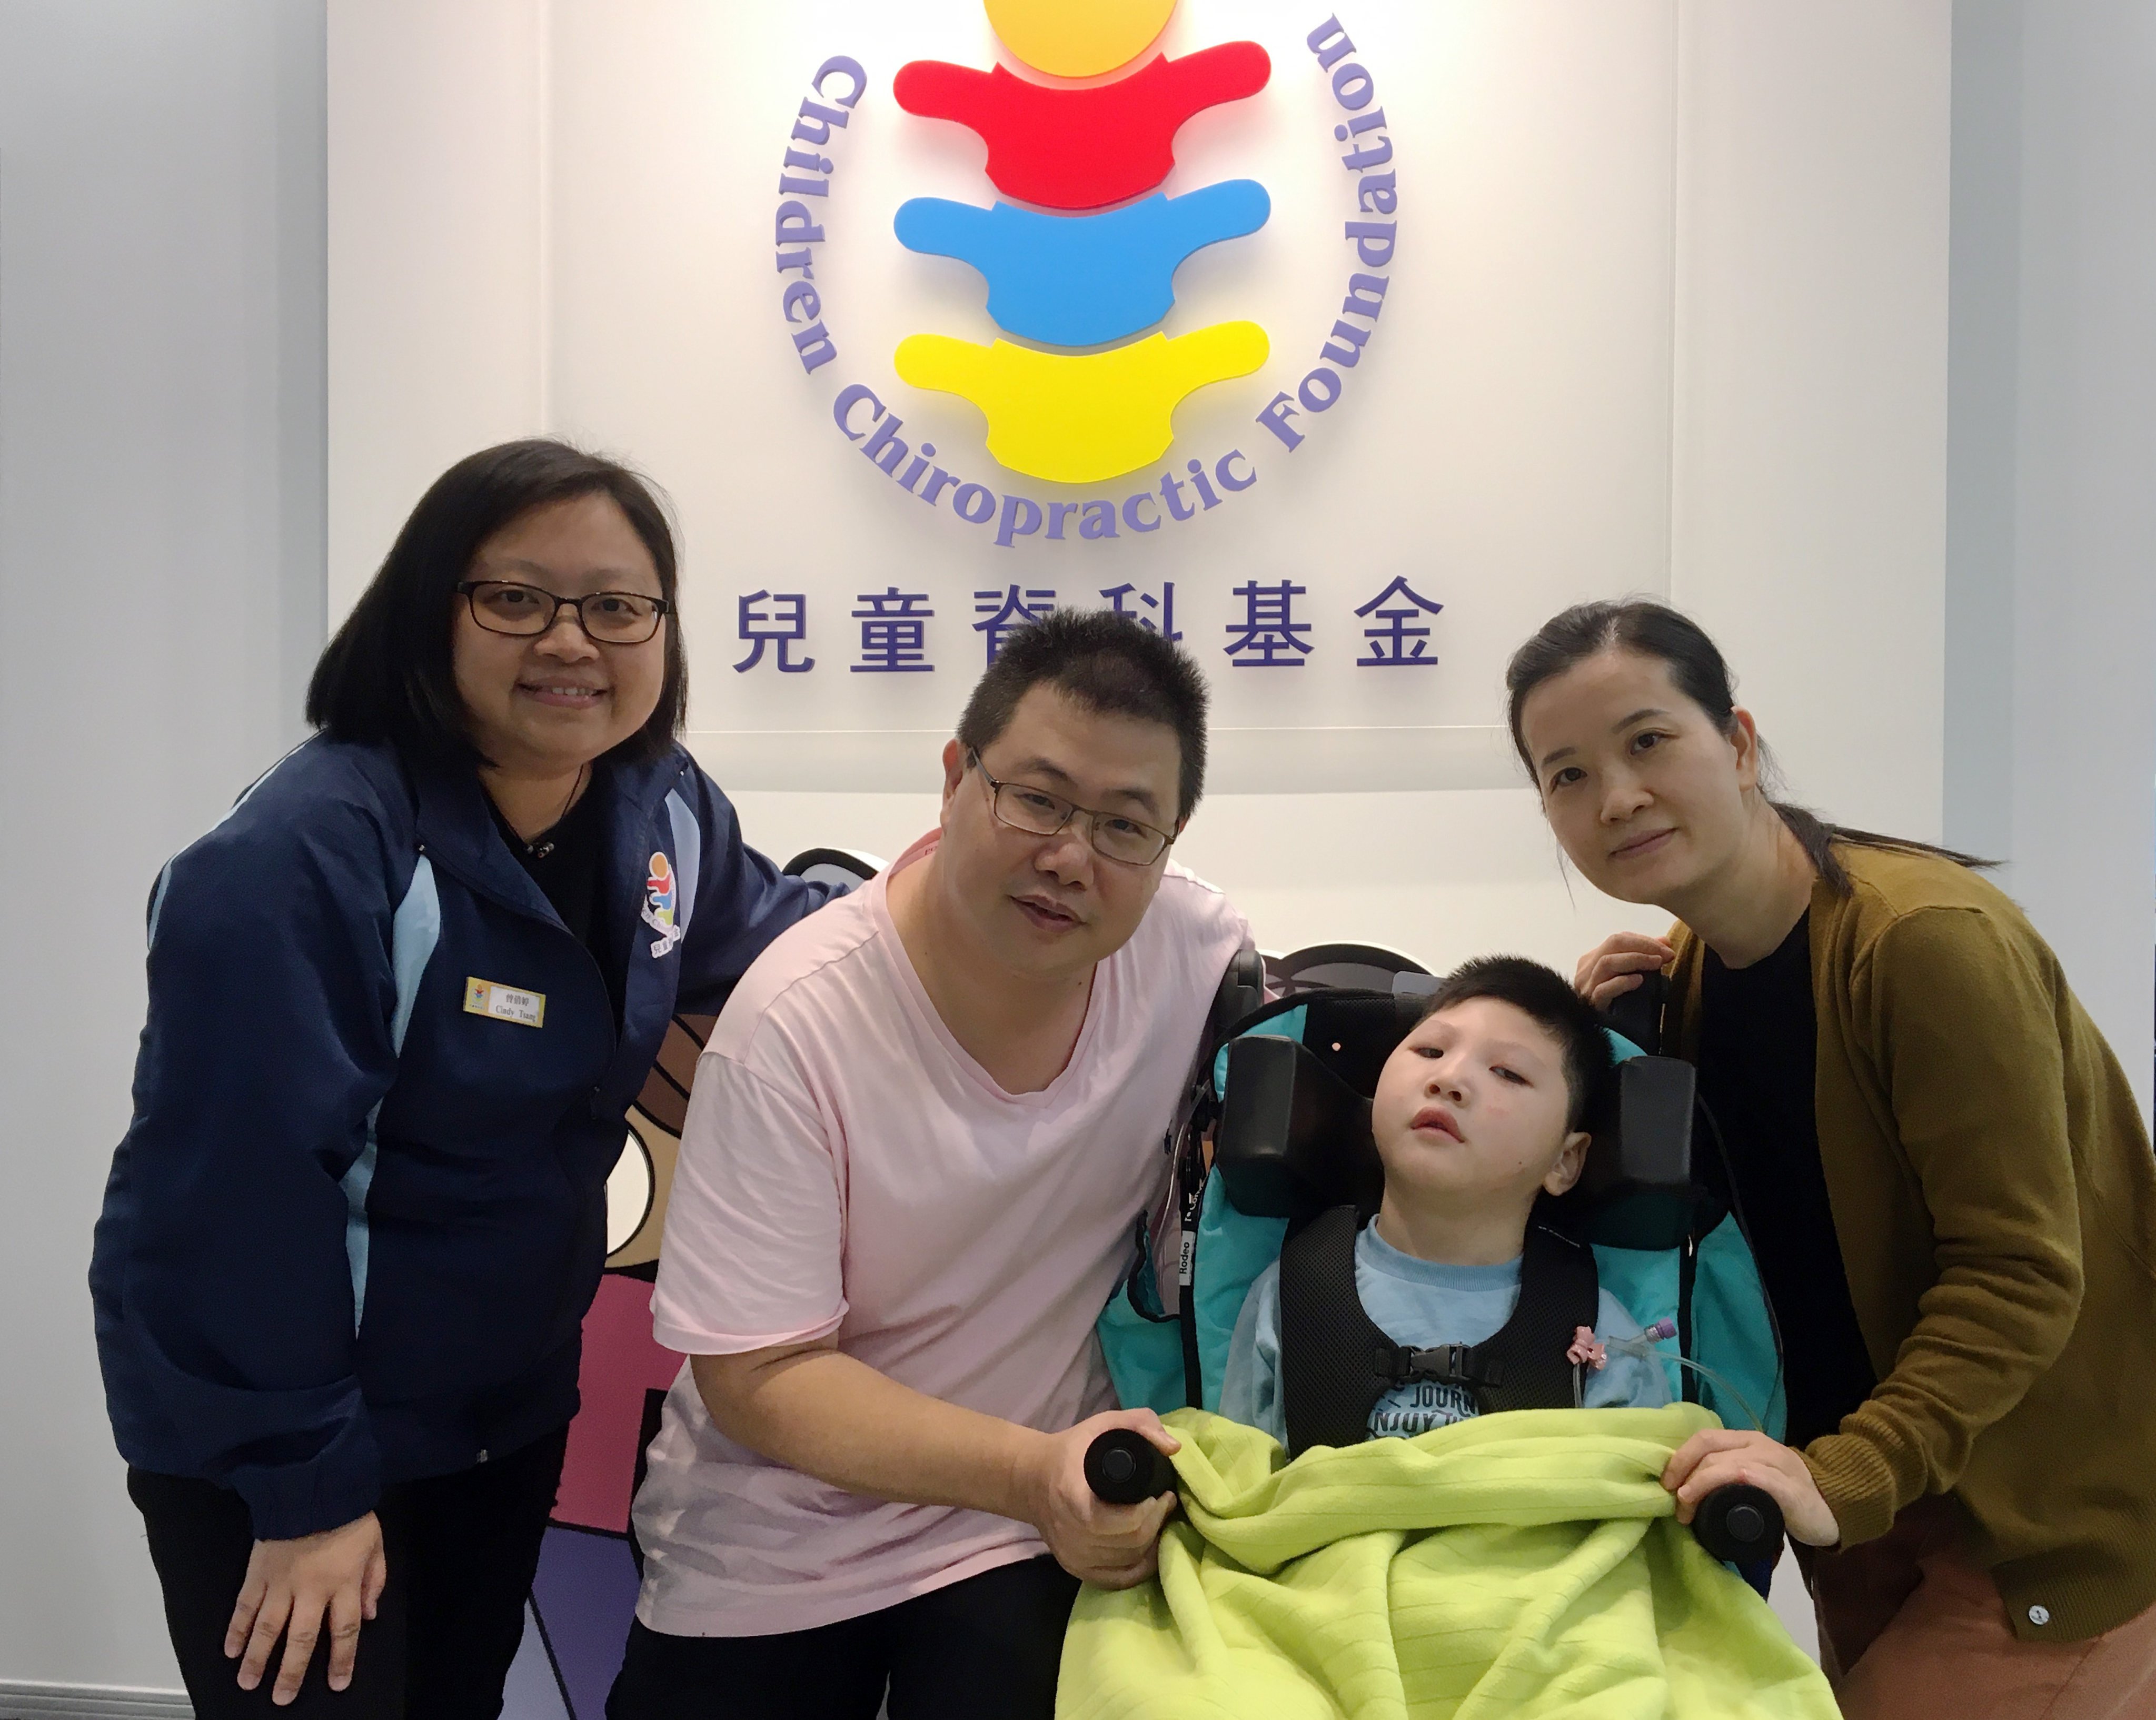 Cindy Tsang (left), chief executive of the Children Chiropractic Foundation, says the charity is able to help families and their children such as “Yau Yau” (second from right) thanks to donations and volunteer work. Photo: Cindy Sui